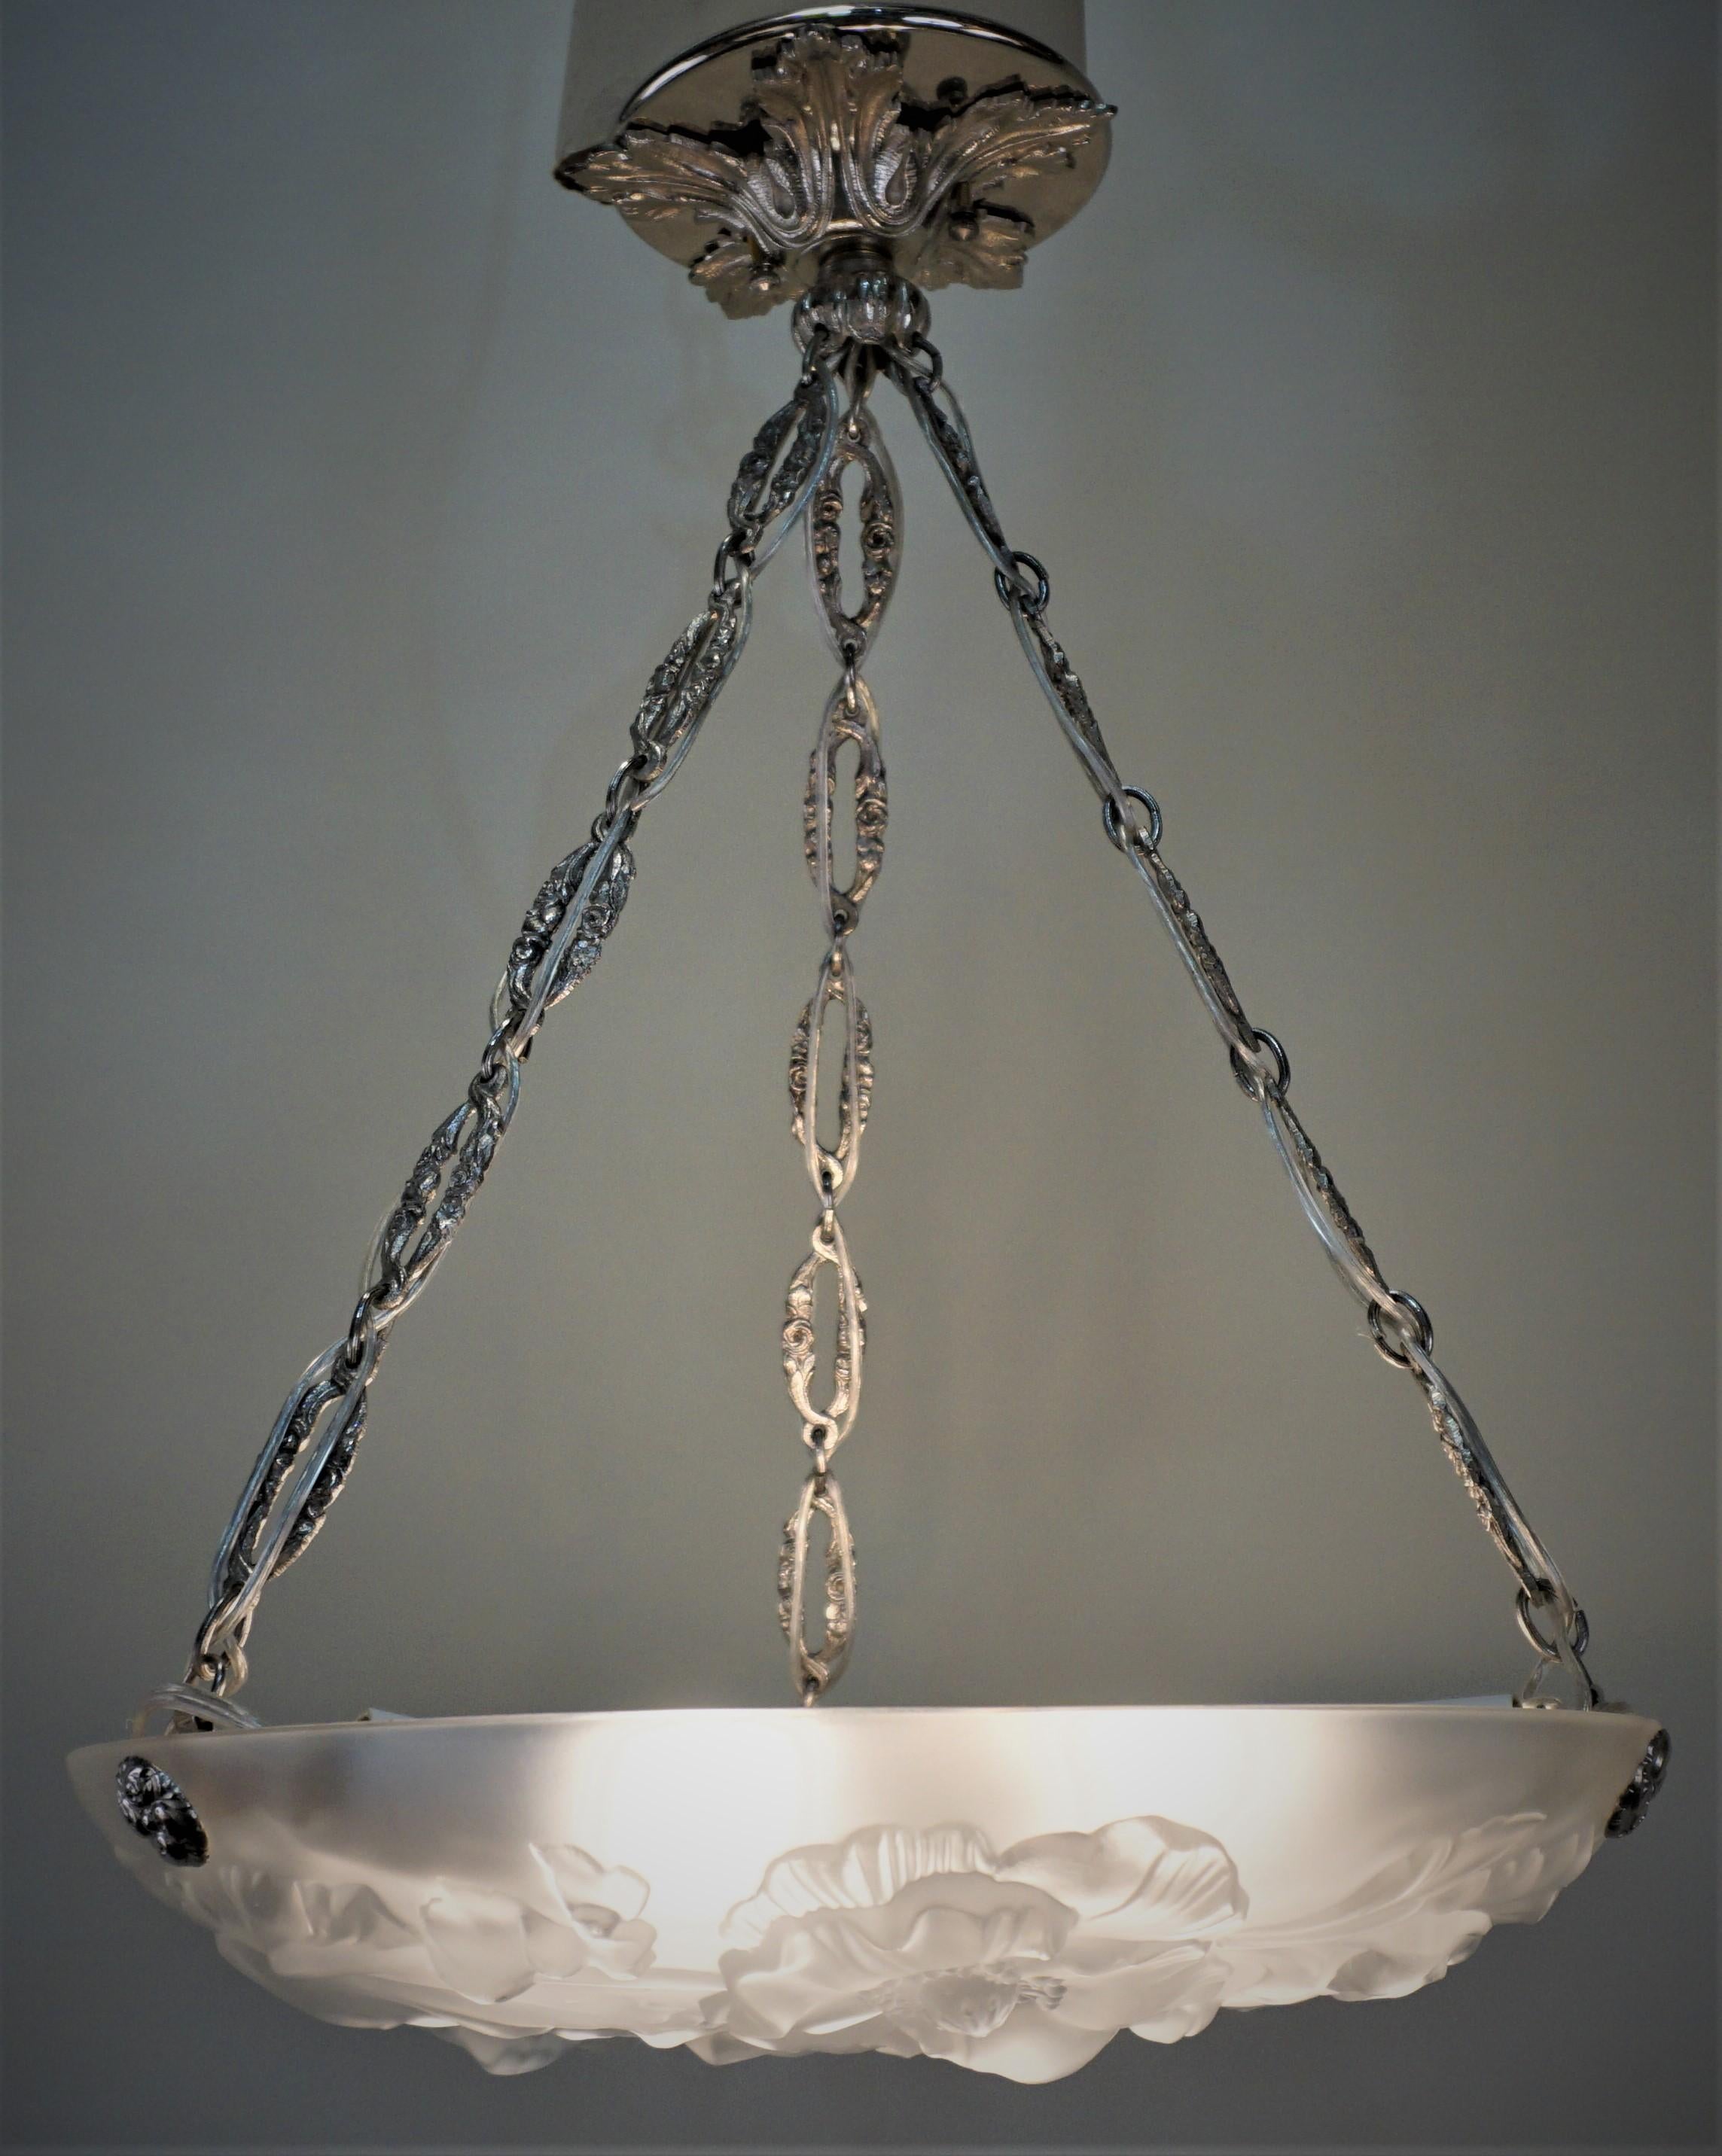 Beautiful 1920s clear frost color glass nickel on bronze hardware chandelier.
Six-light 60 watts max each.